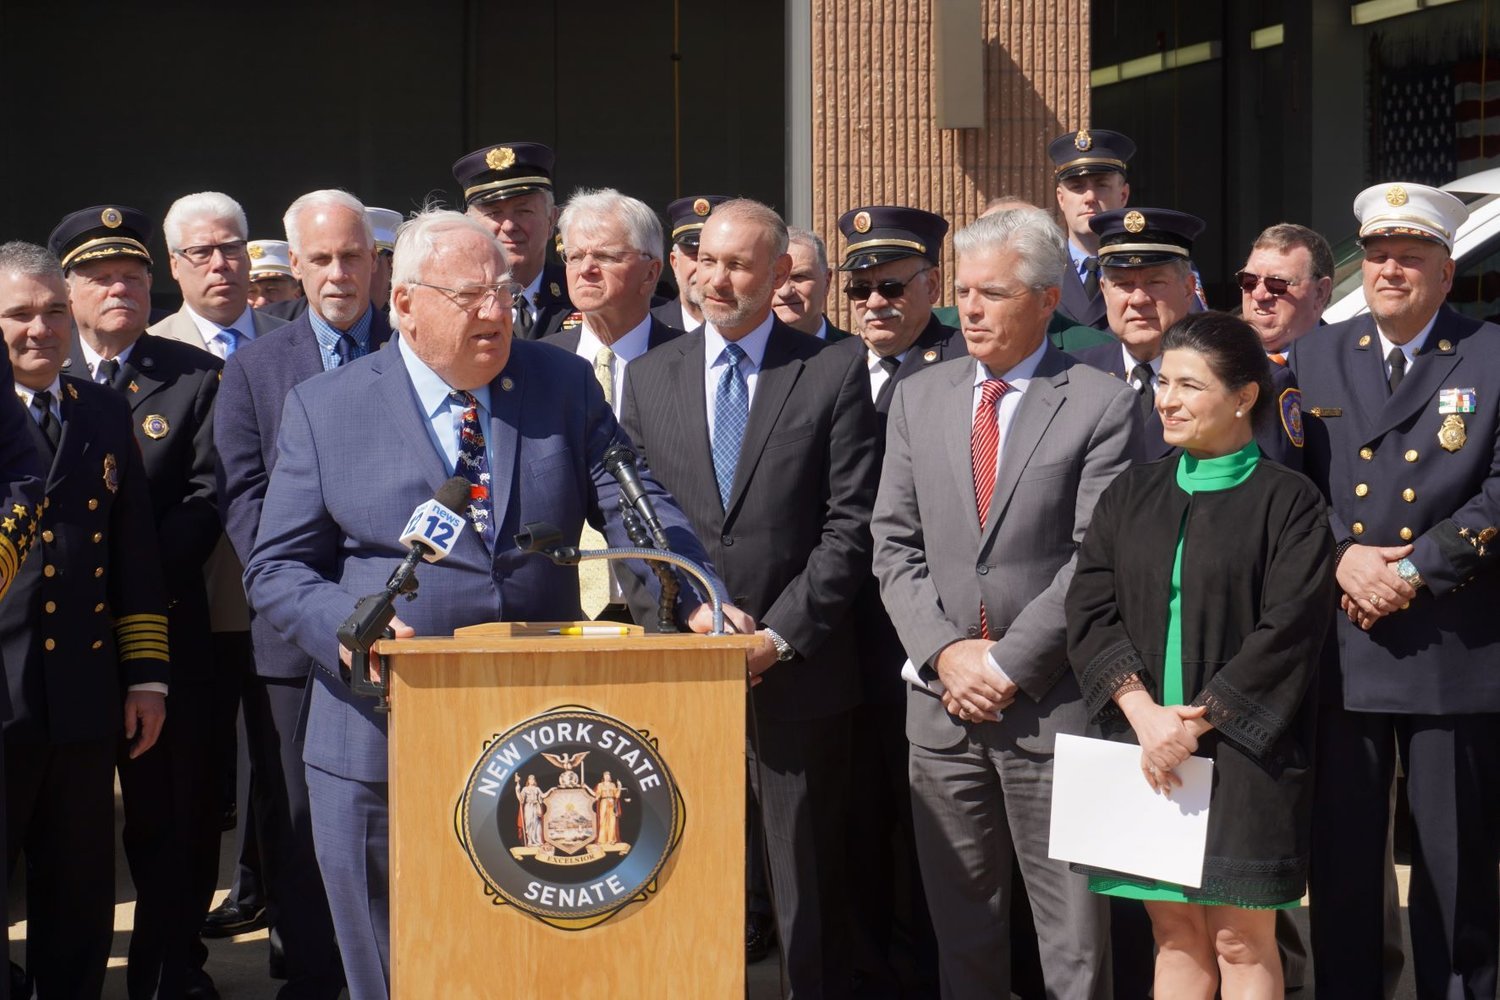 Earlier this June, Senator John E. Brooks, Suffolk County Executive Steve Bellone, Senator Anna Kaplan, Assemblymembers Fred Thiele and Steve Stern, and various state and local volunteer Firefighter organizations came together at the East Farmingdale Fired Department to announce the inclusion of the EMS Cost Recovery Act (Senate Bill S7186A) in the NY State Budget; and discuss its implications for volunteer emergency services across the state. Put simply, the EMS Cost Recovery Act allows allows volunteer fire departments to recover costs for emergency medical services (EMS) rendered. 